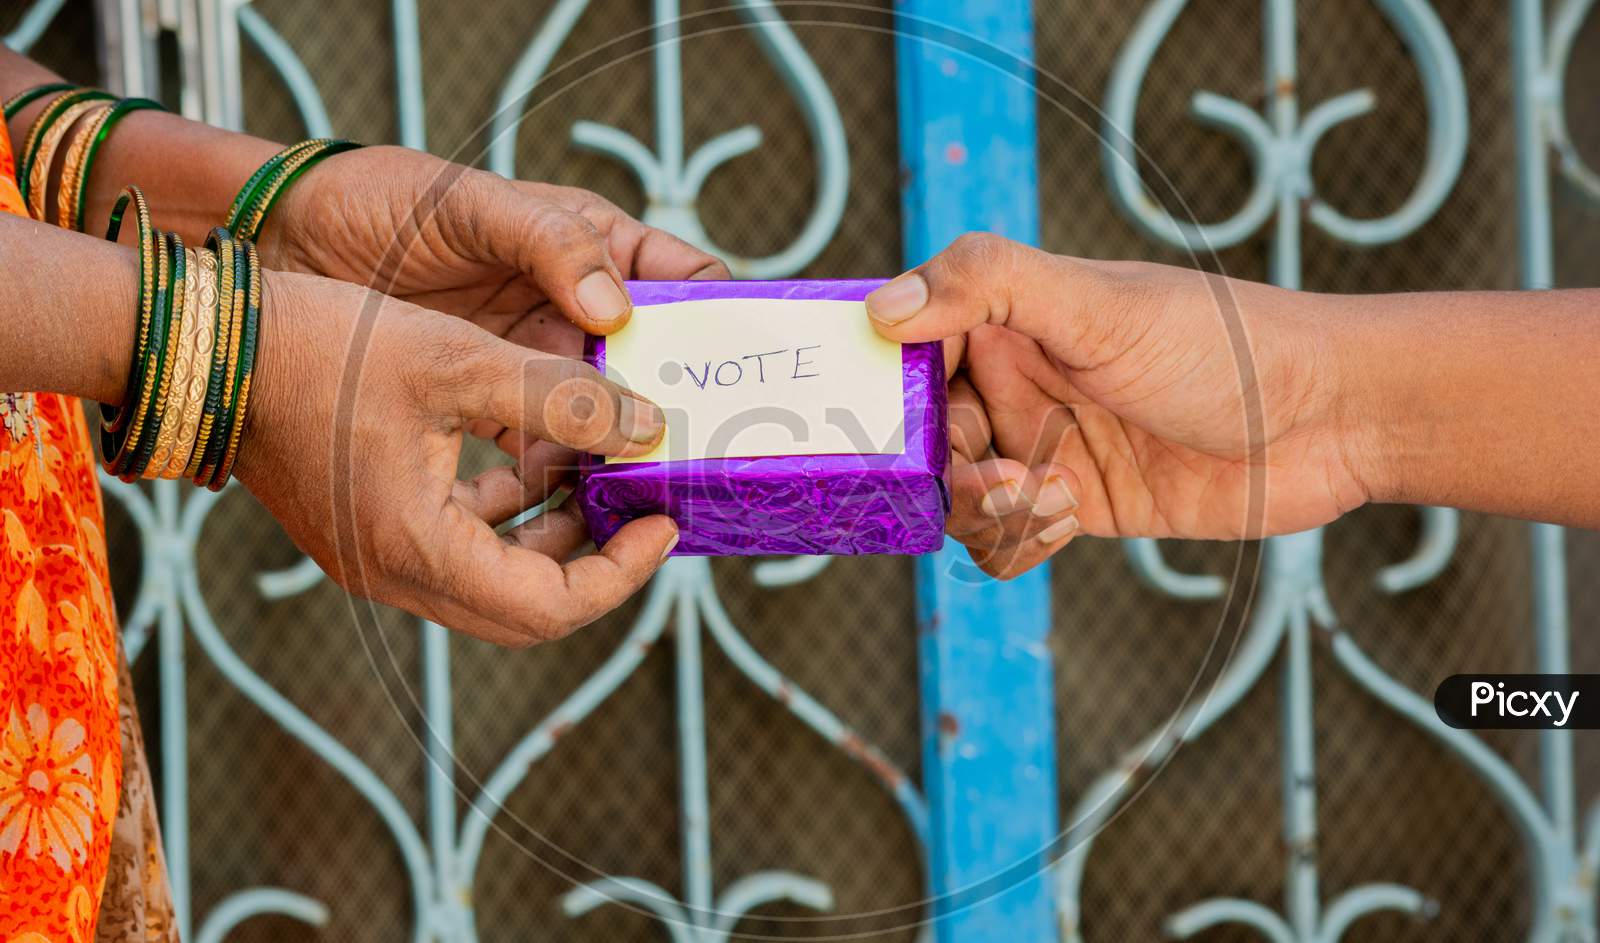 Person Giving Gift To Woman For Vote In Front Of The Door, Concept Of Showing A Gift For Vote.